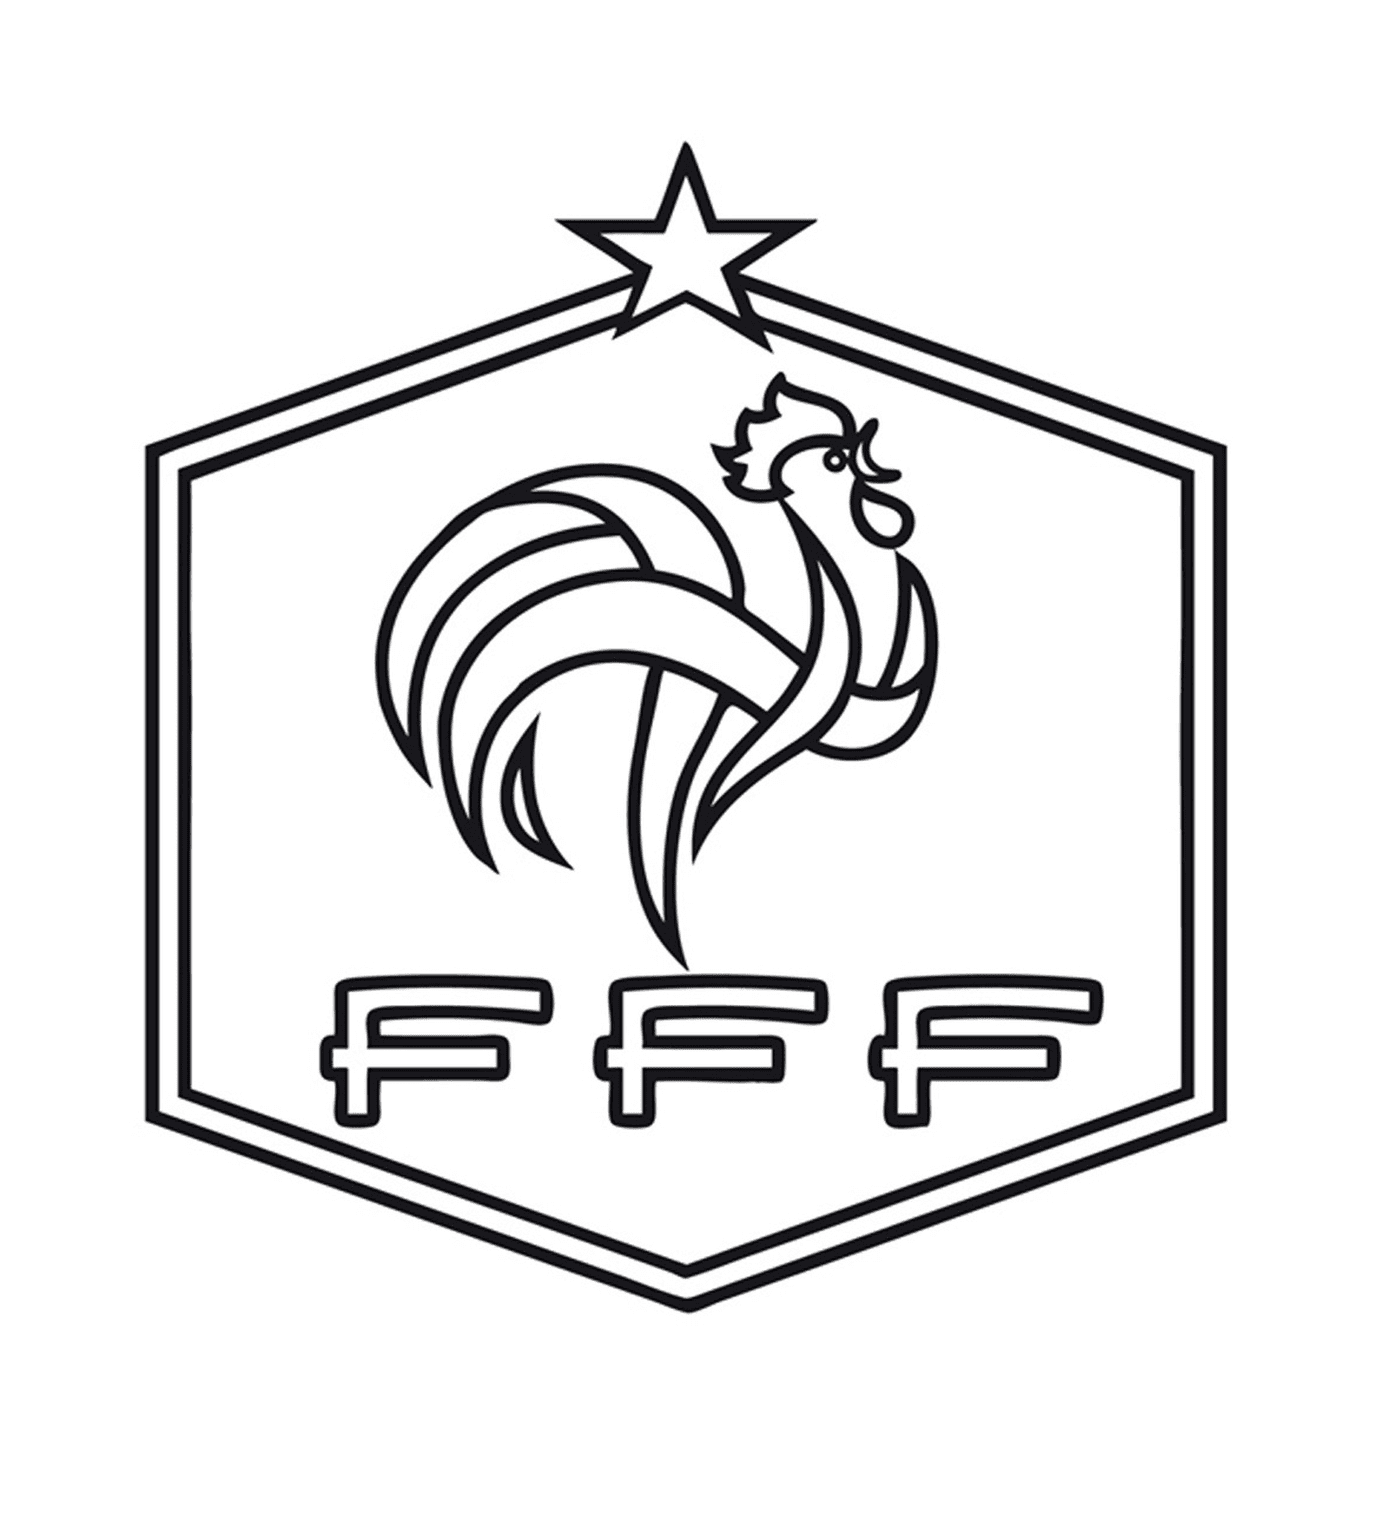  Football in France, rooster and star 